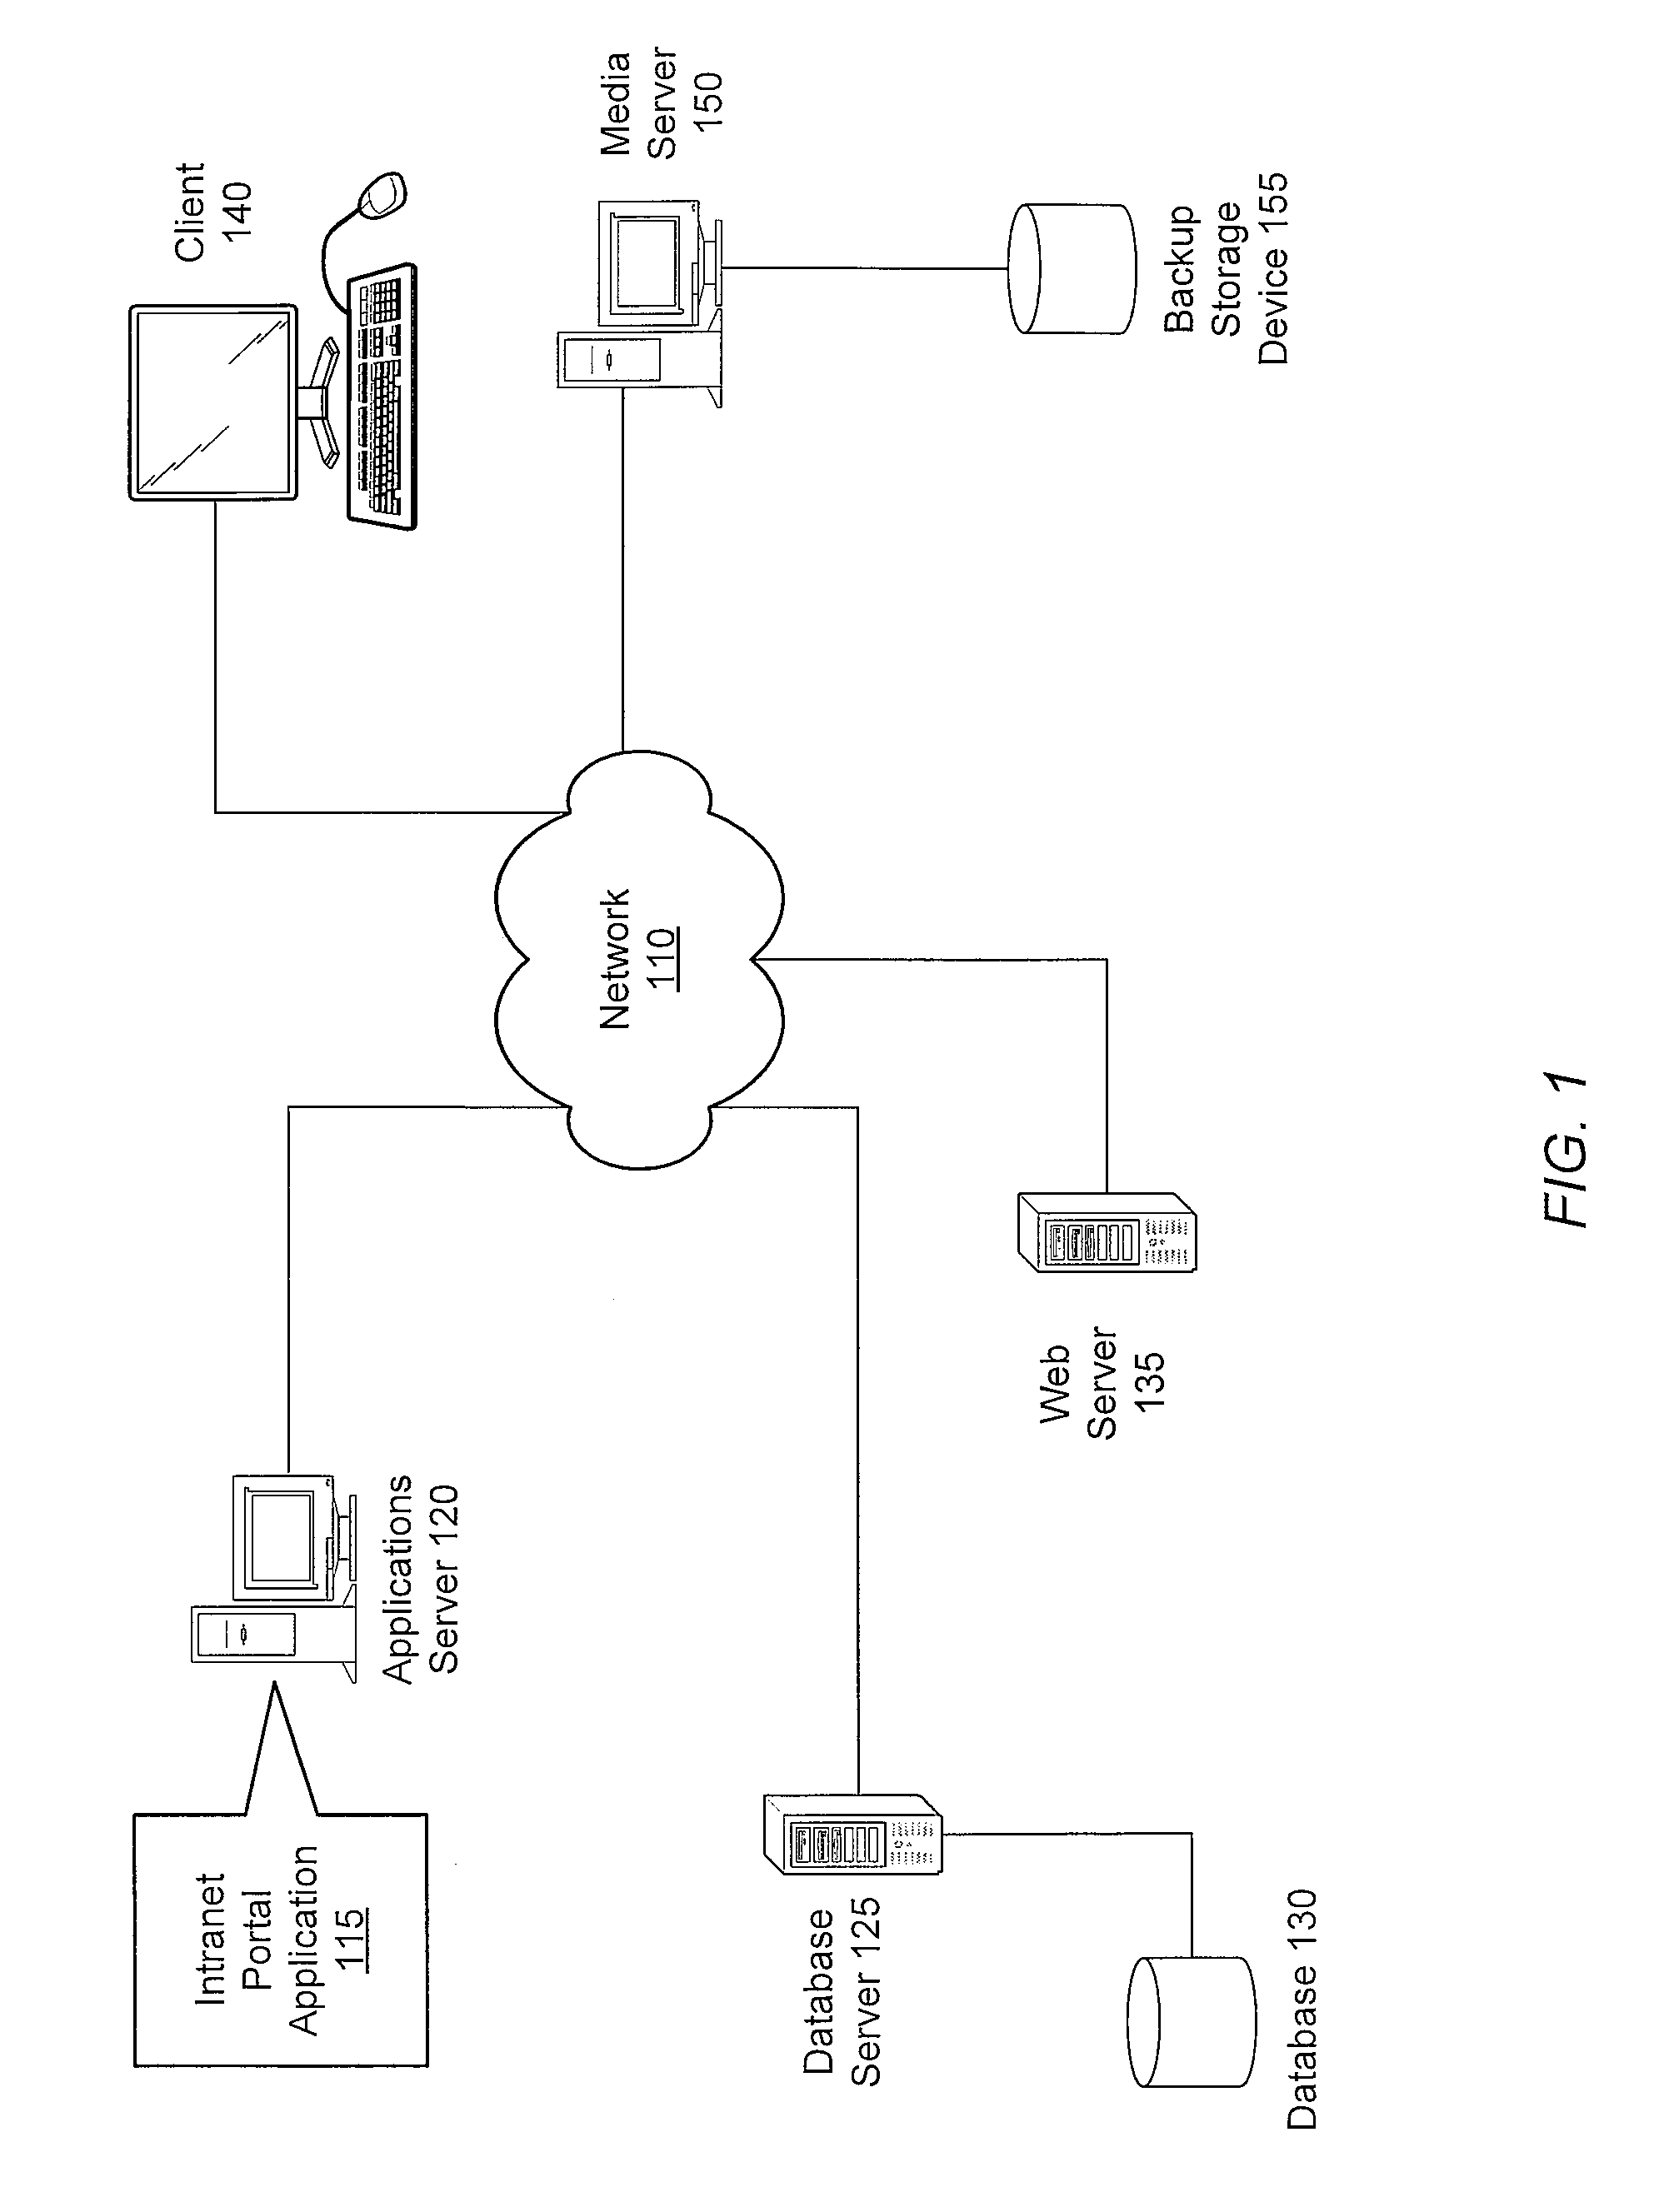 Method and system of restoring items to a database while maintaining referential integrity